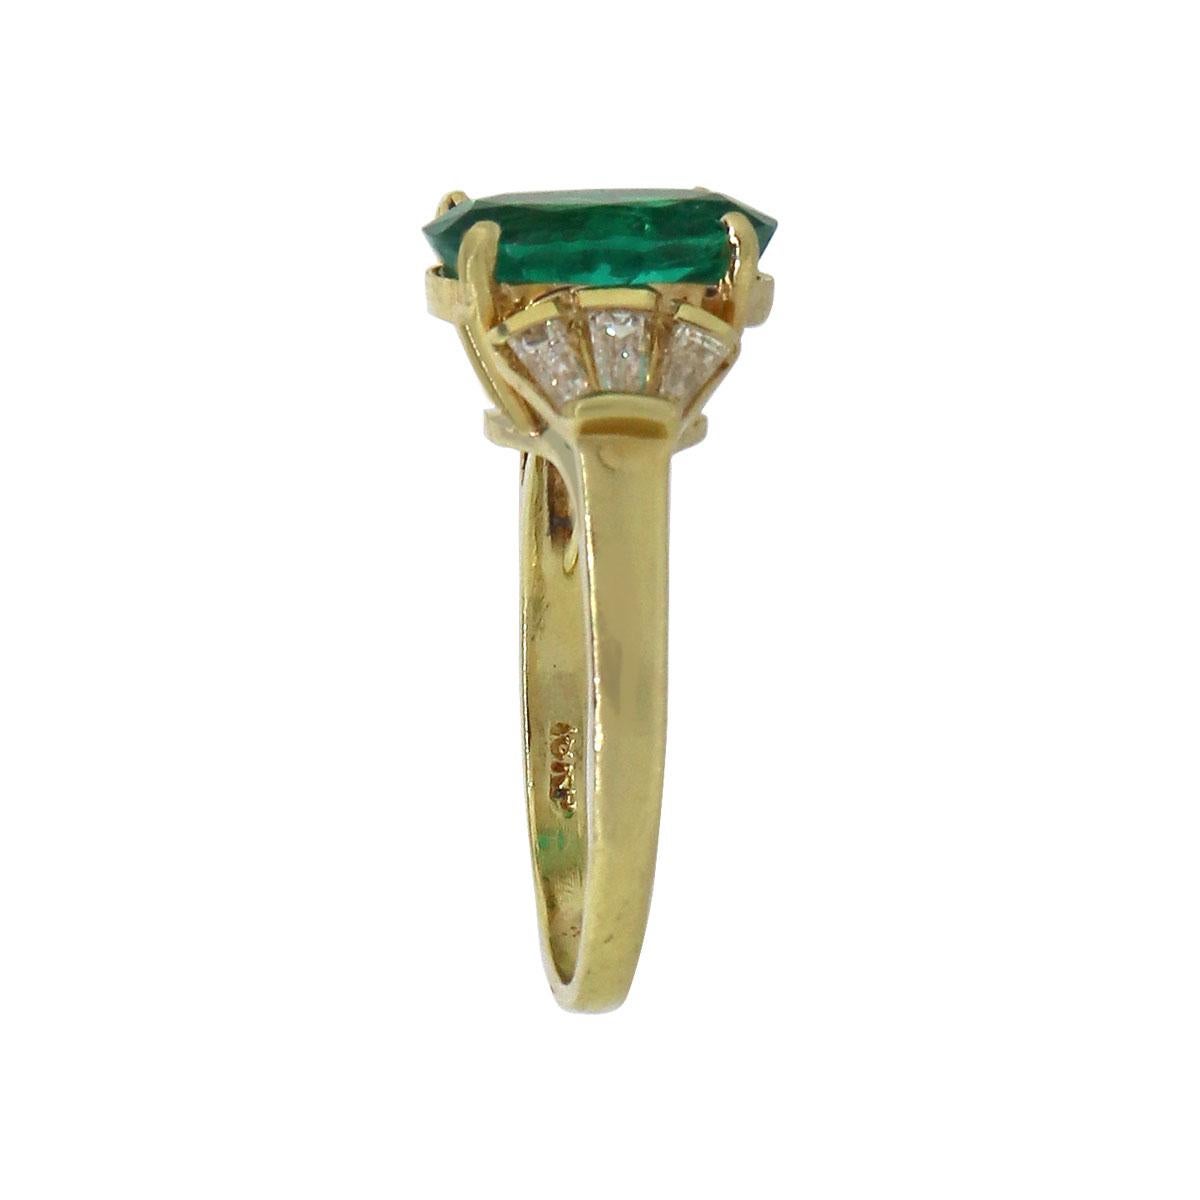 Material: 18k Yellow Gold
Center  Gemstone Details: 4.07ct oval cut emerald. AGL #1101100
Adjacent Diamond Details: Approx. 0.70ctw of baguette cut diamonds. Diamonds are G/H in color and VS in clarity
Ring Size: 8
Ring Measurements: 0.80″ x 0.47″ x